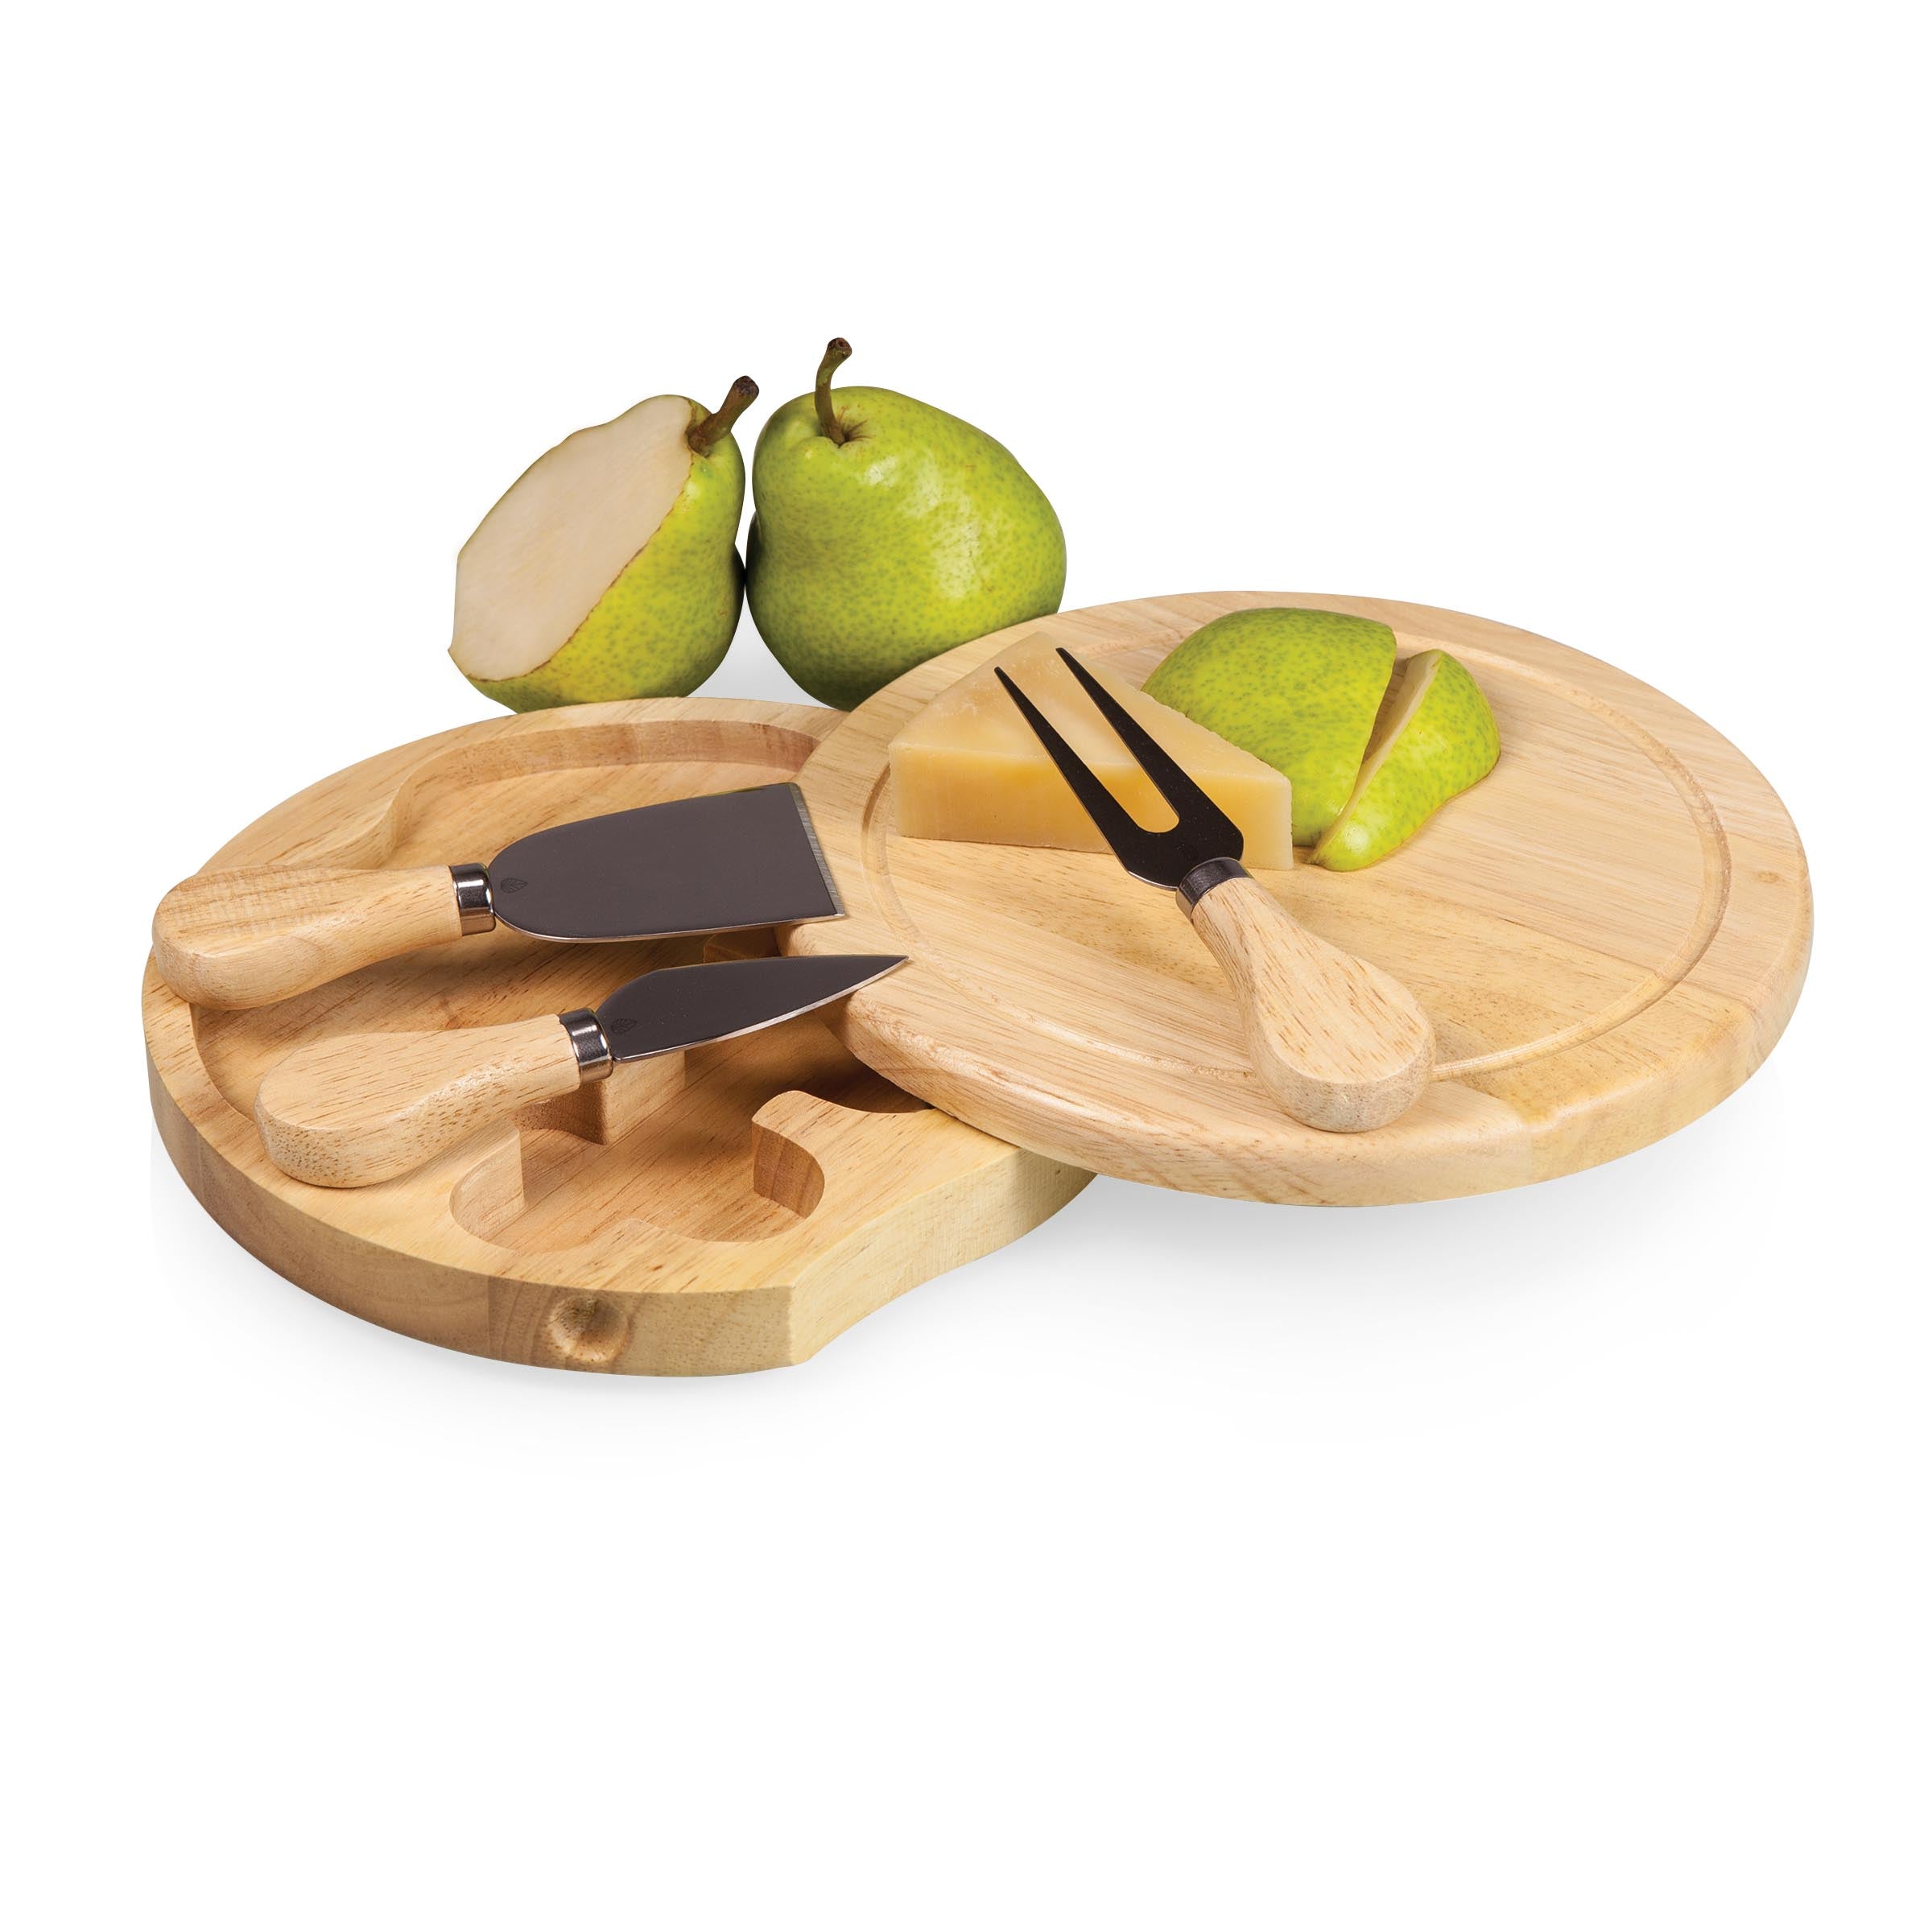 West Point Black Knights - Brie Cheese Cutting Board & Tools Set